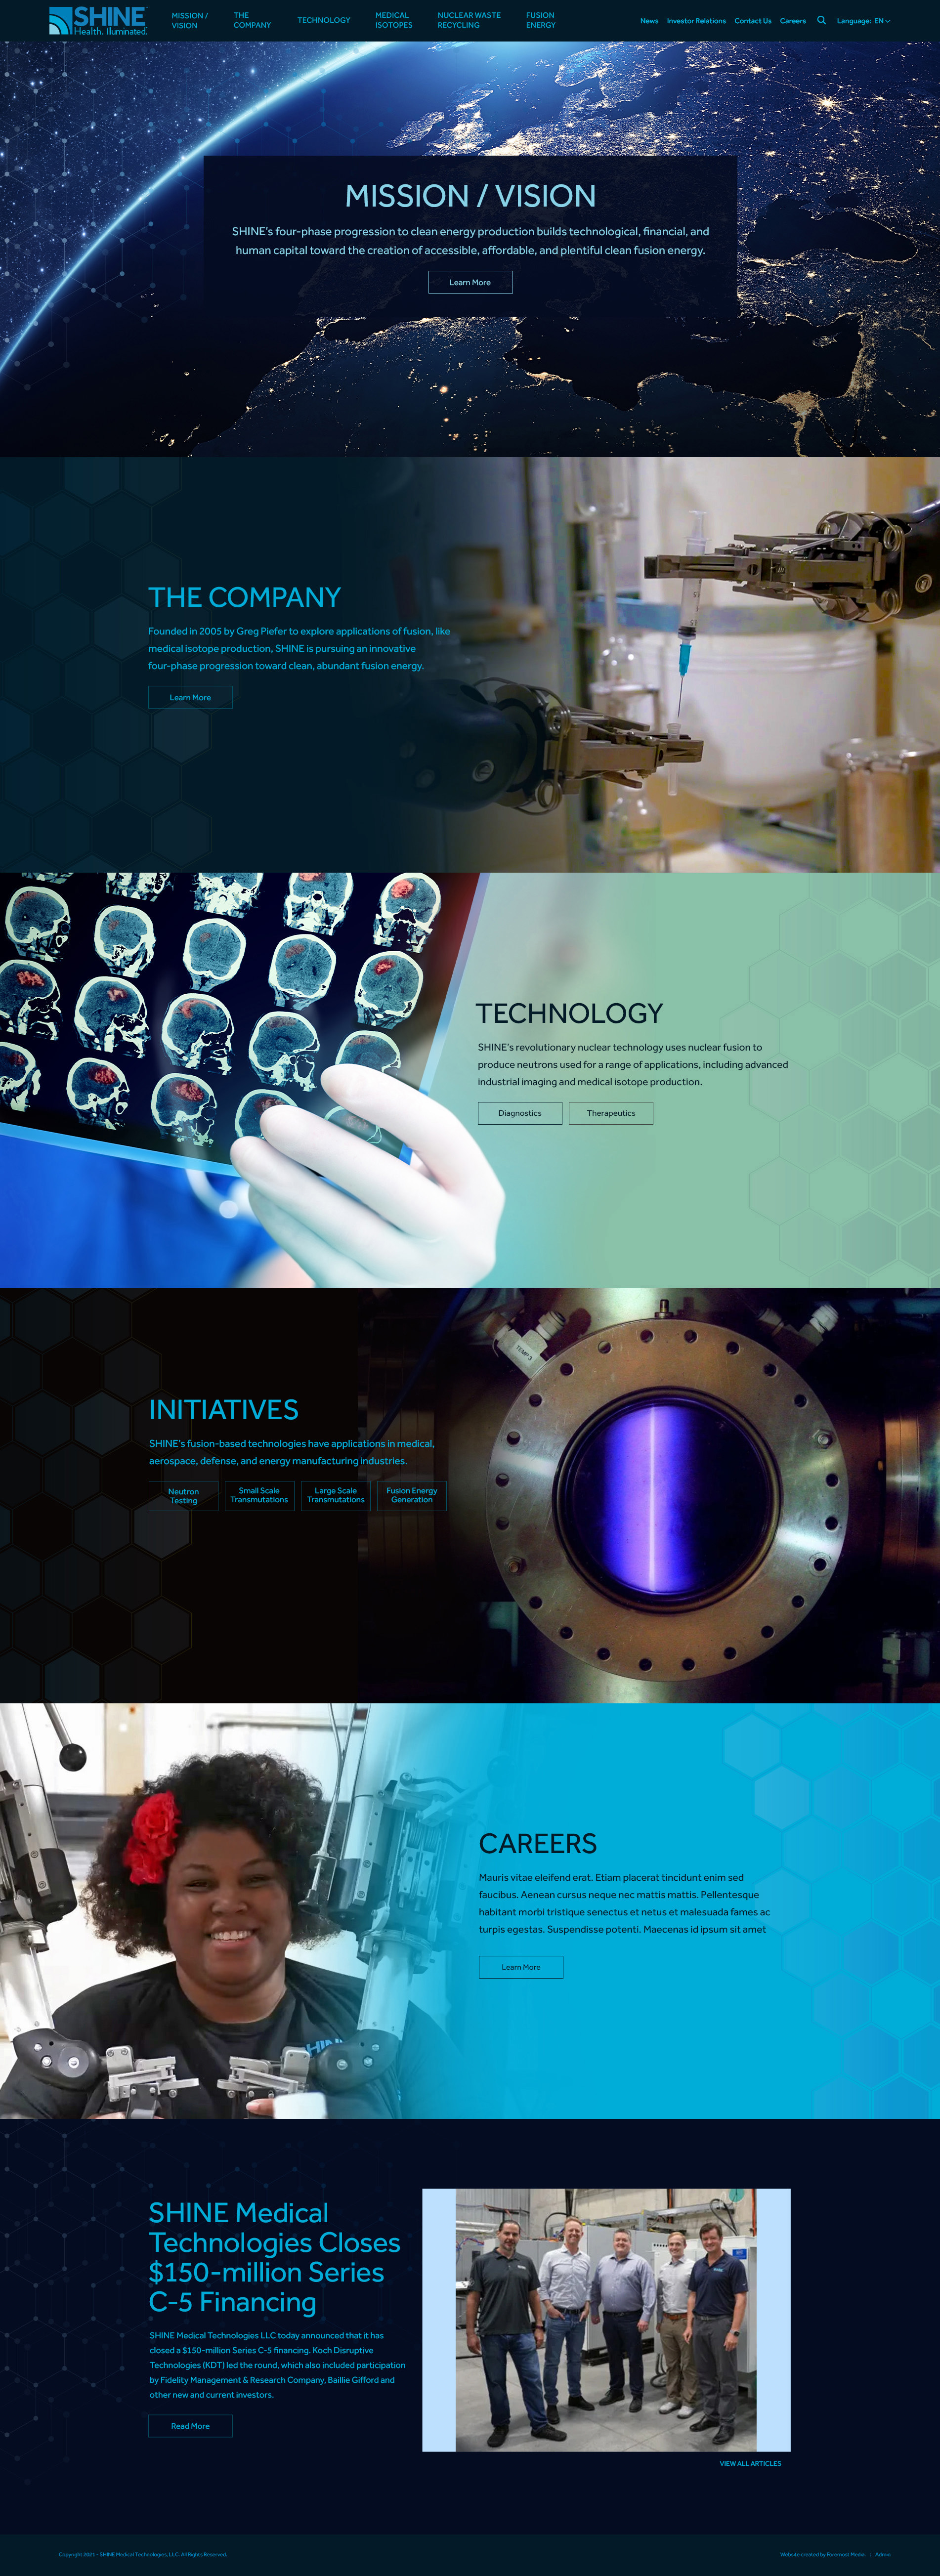 Example of the new and improved WordPress website designed by Foremost Media for Shine Technologies